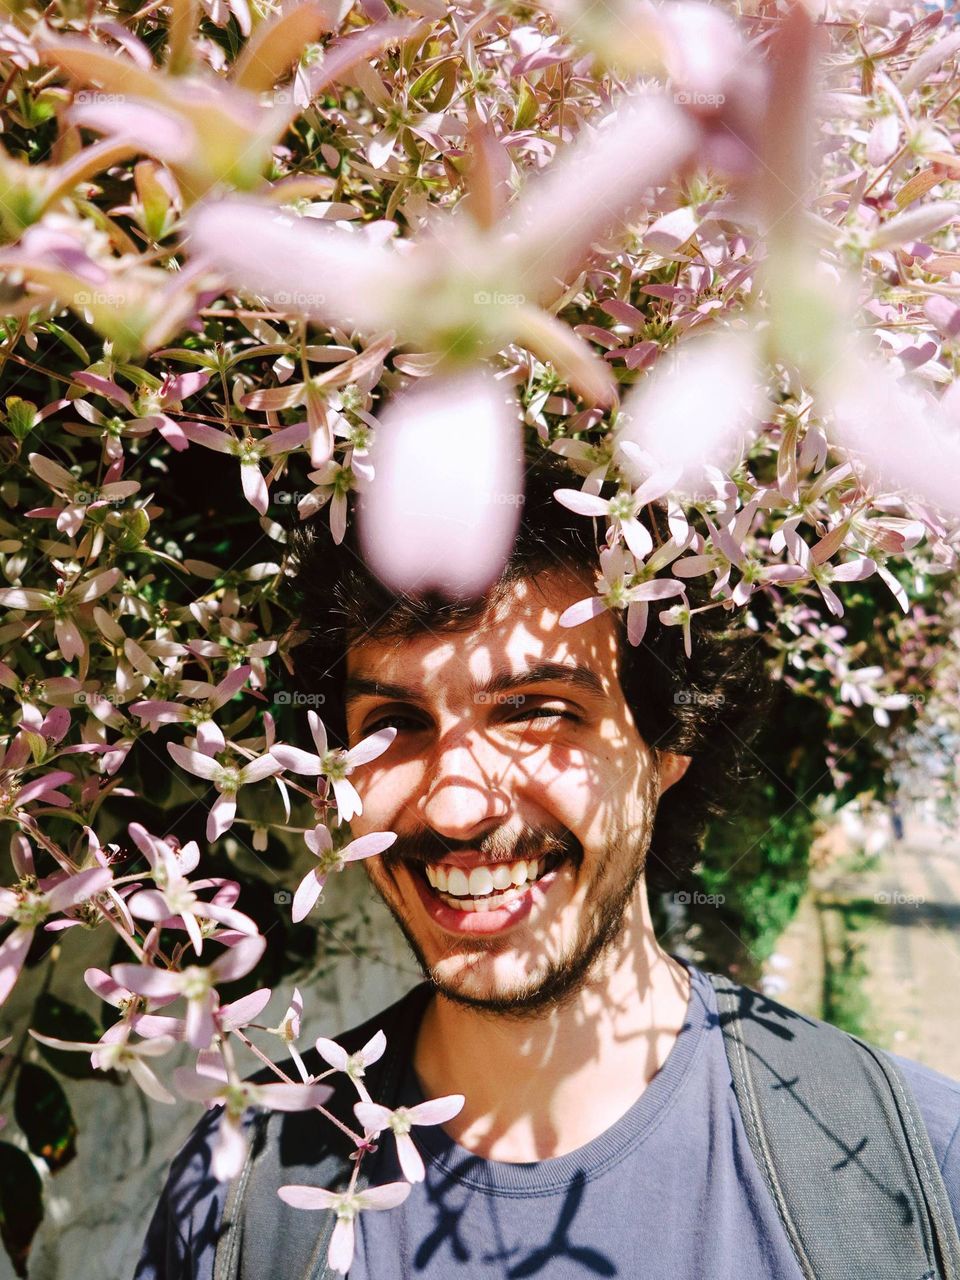 handsome man smiling, with pink flowers on the foreground and the background.